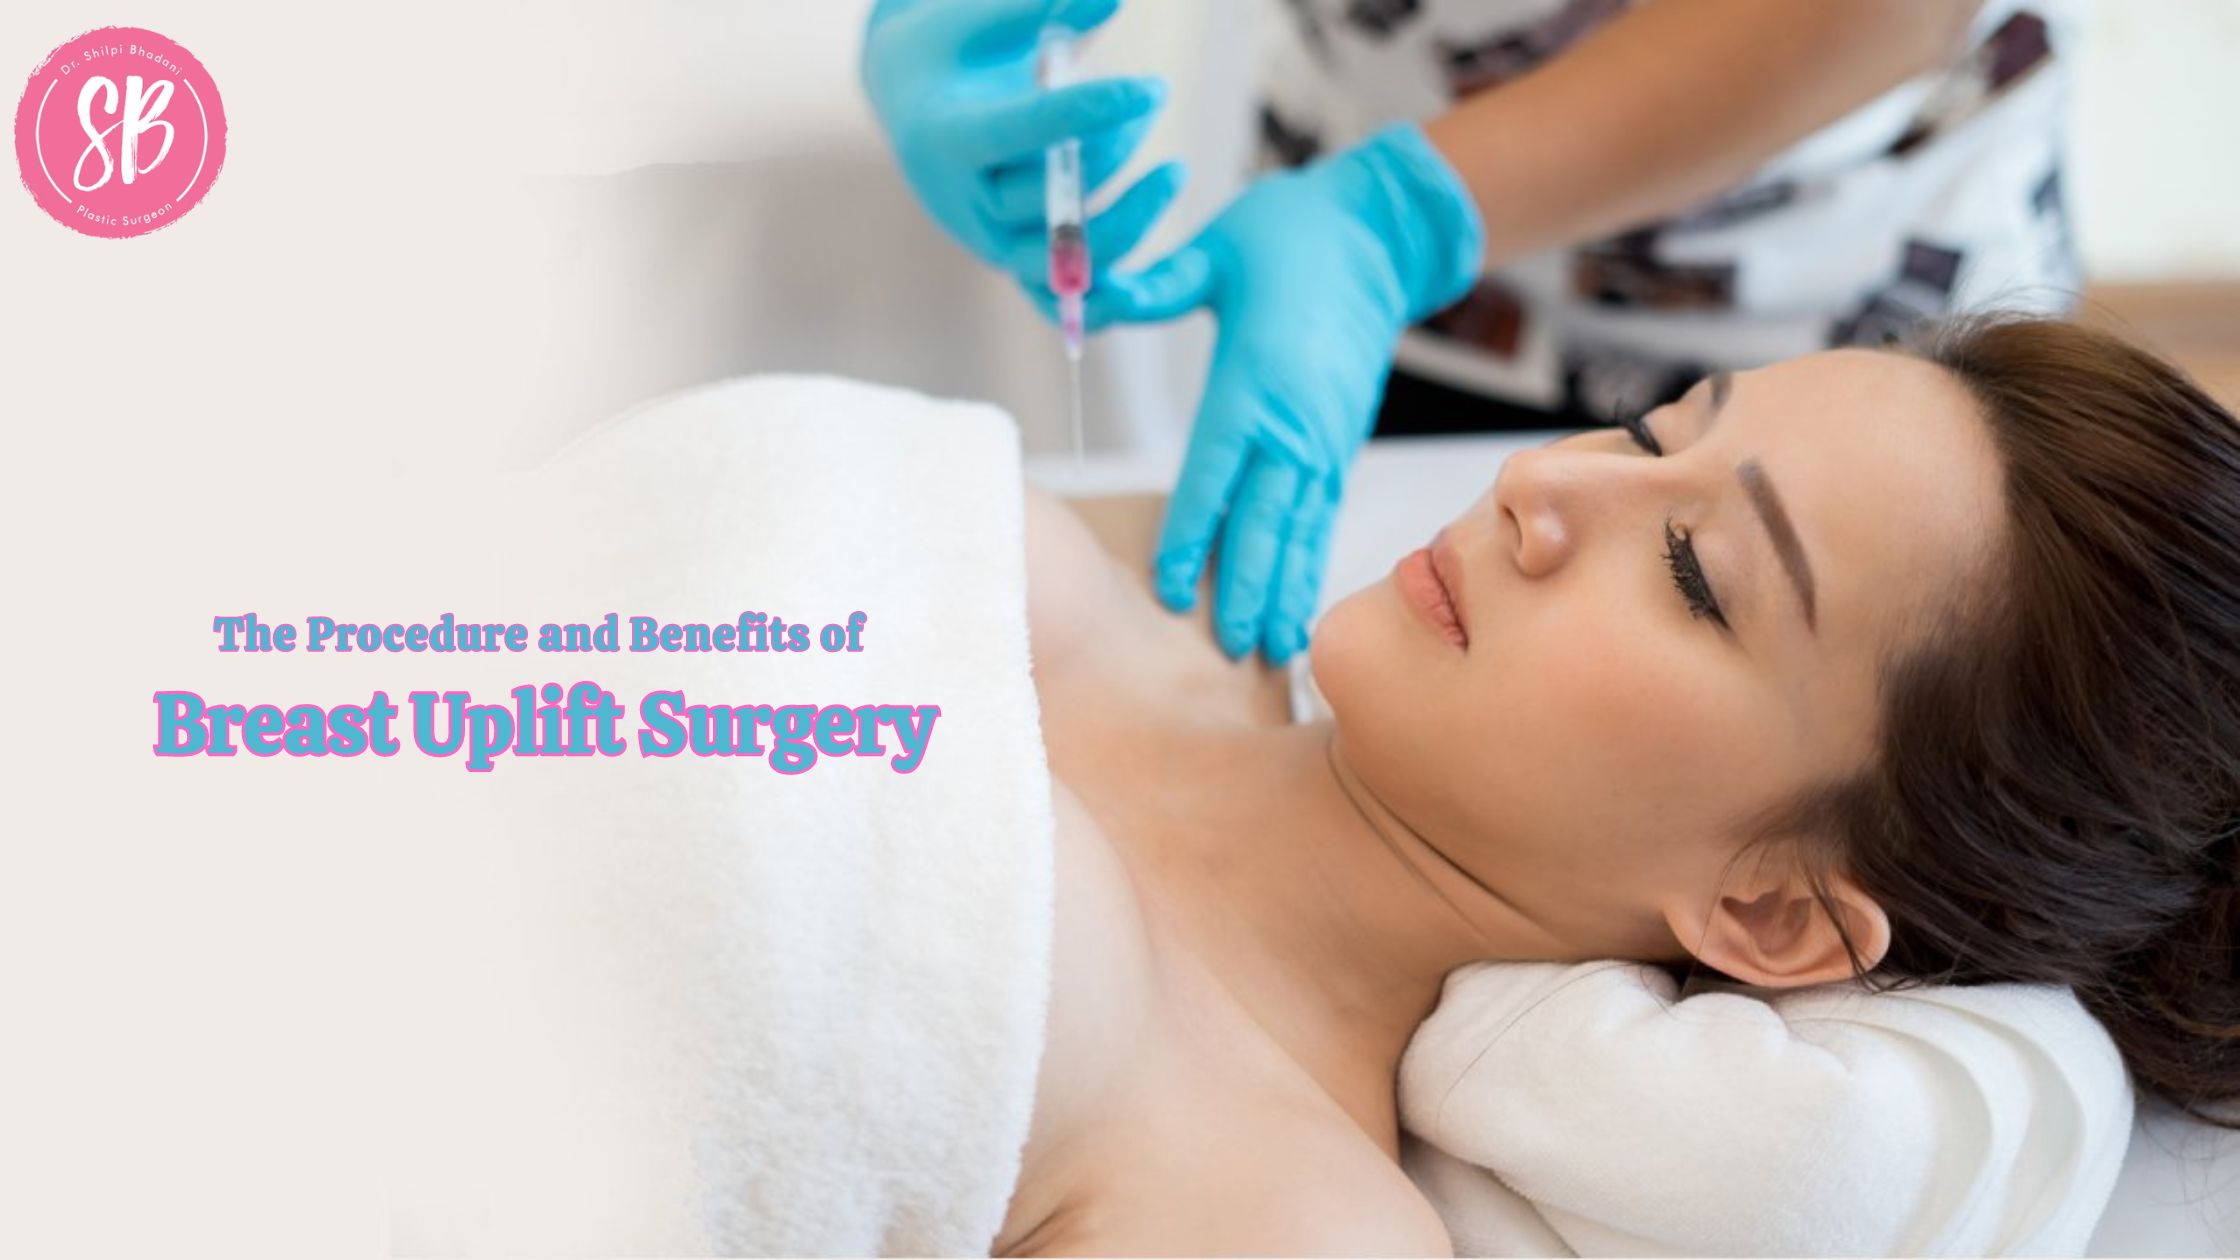 The Procedure and Benefits of Breast Uplift Surgery